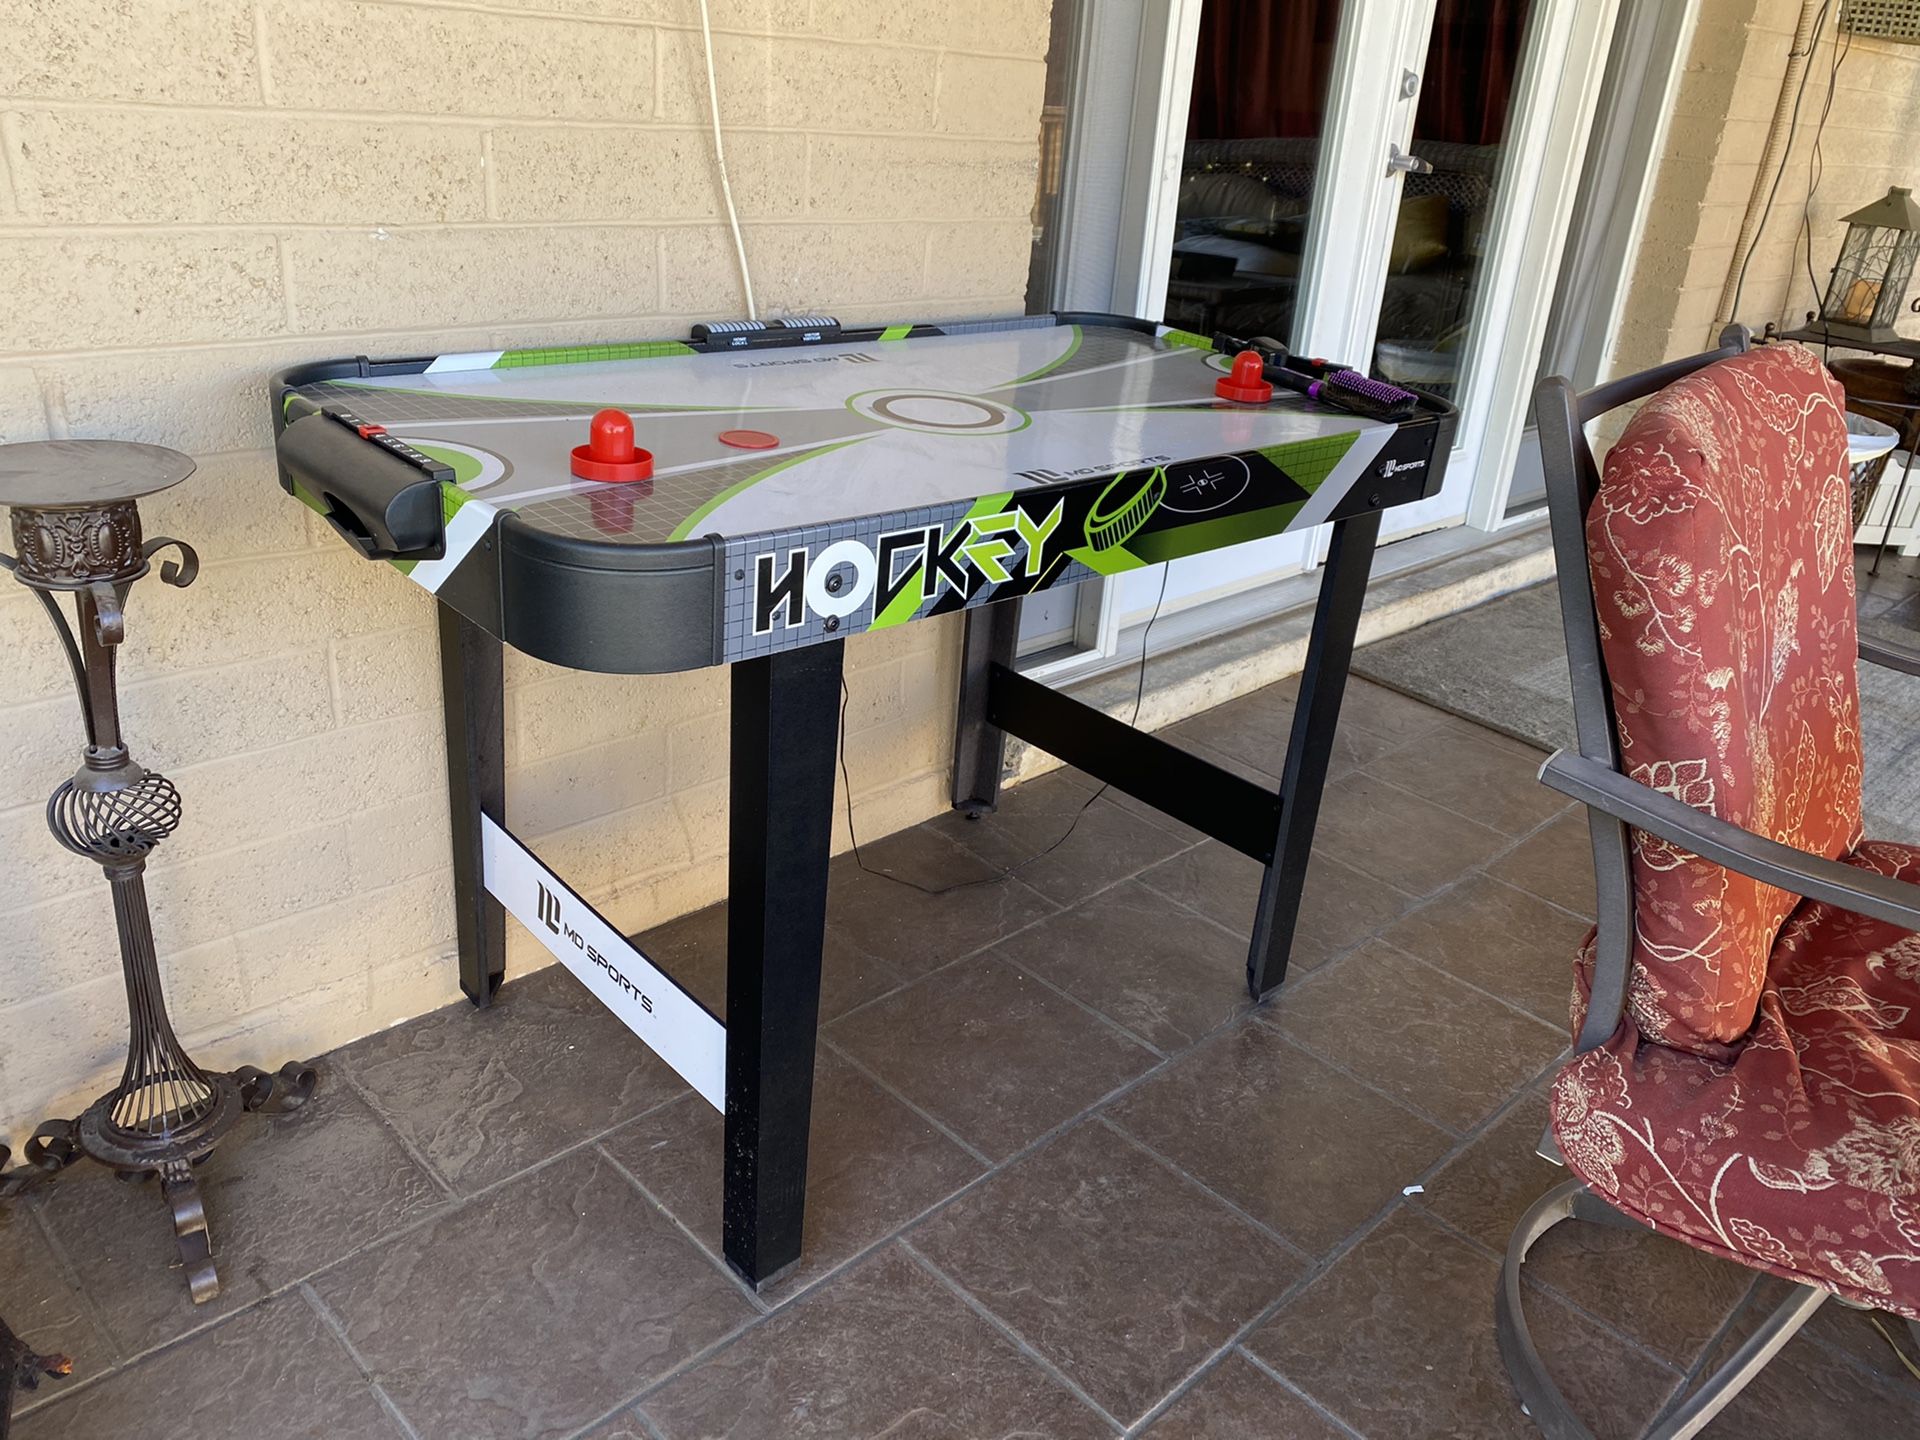 48” MD Sports Air Hockey Table - Brand New